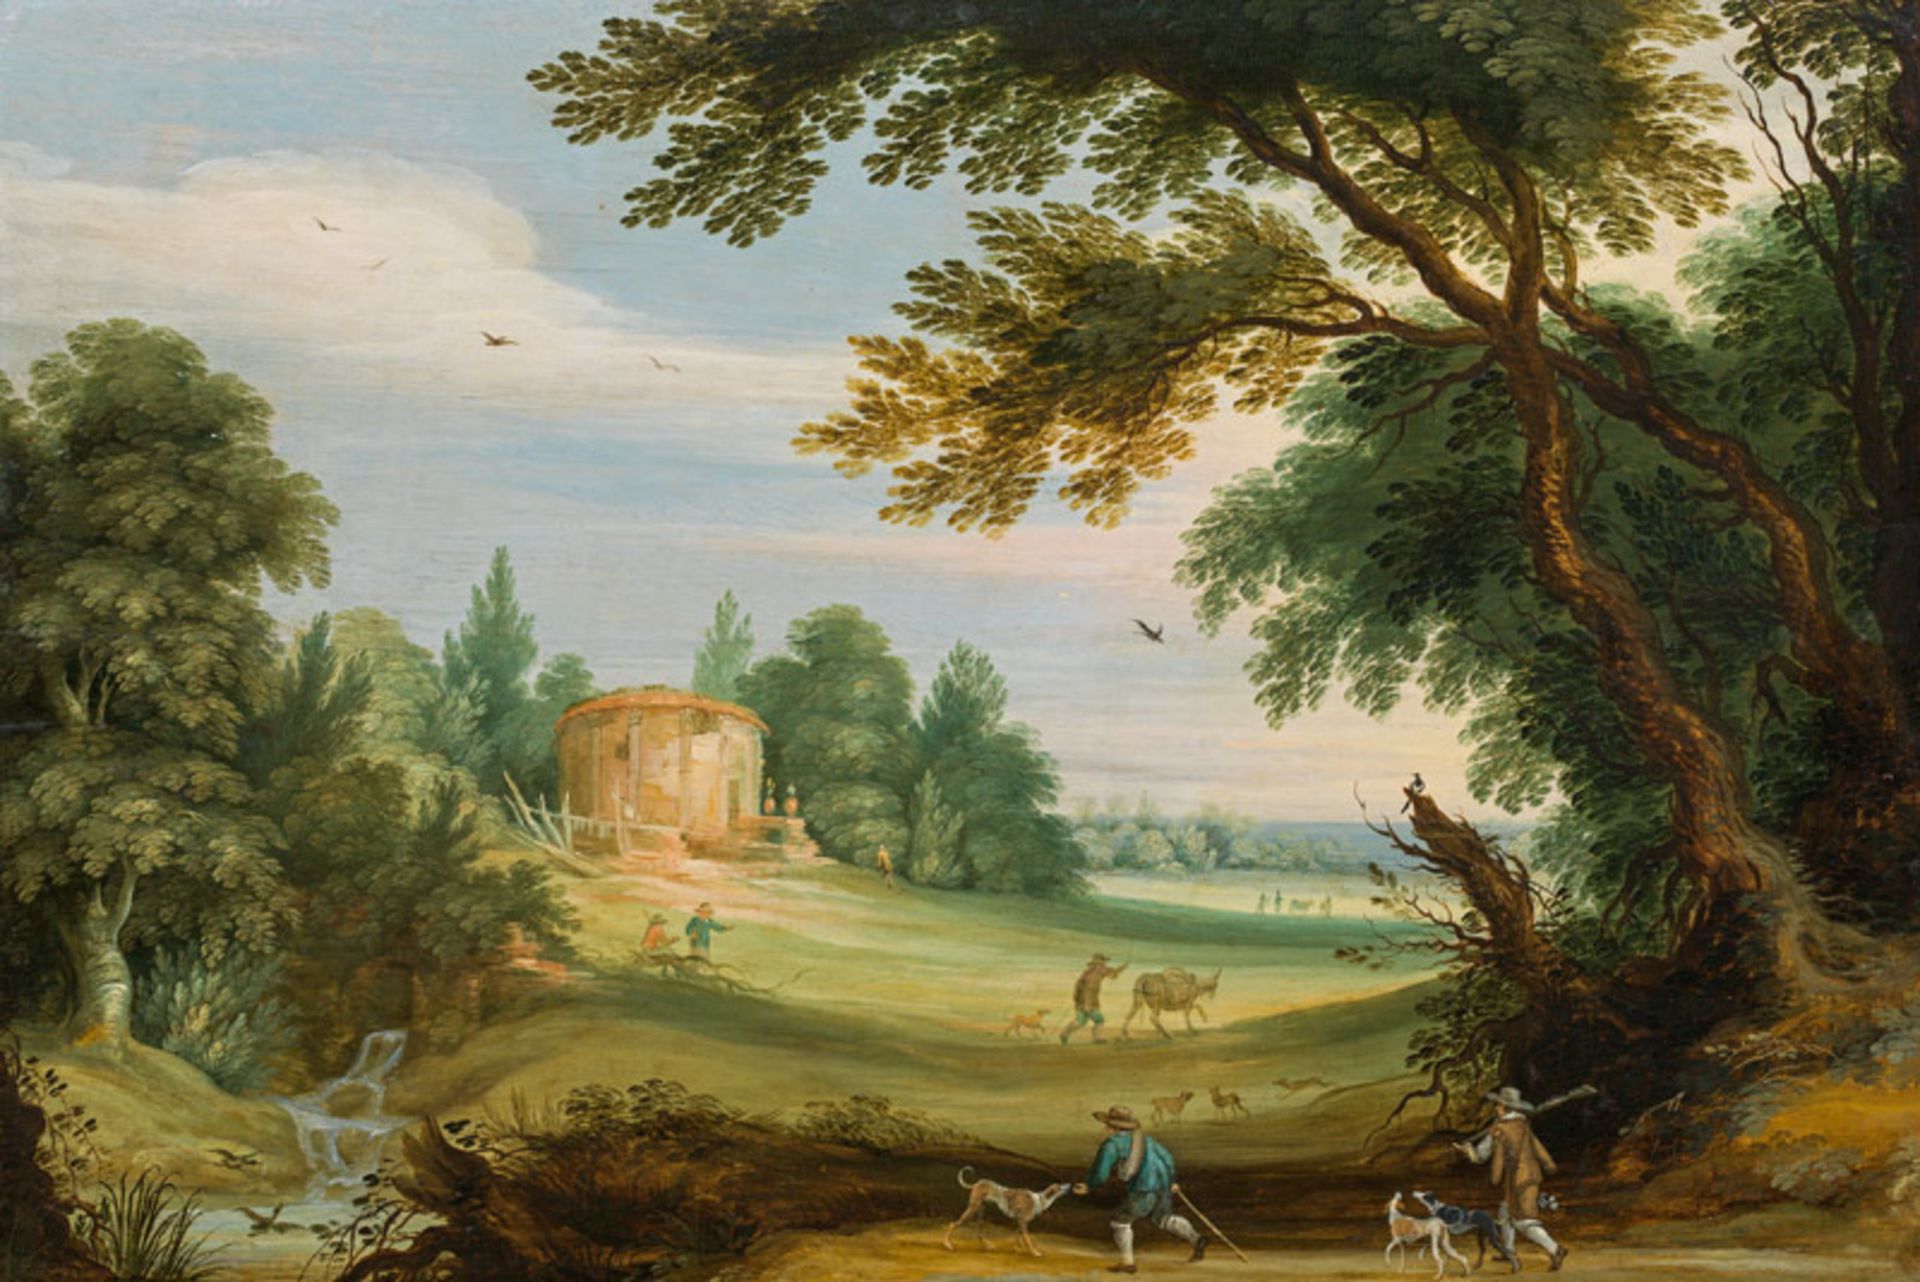 Alexander KeirincxLandscape with a small temple oil on panel, parqueted; 43.5 × 64 cmSale Sotheby's,